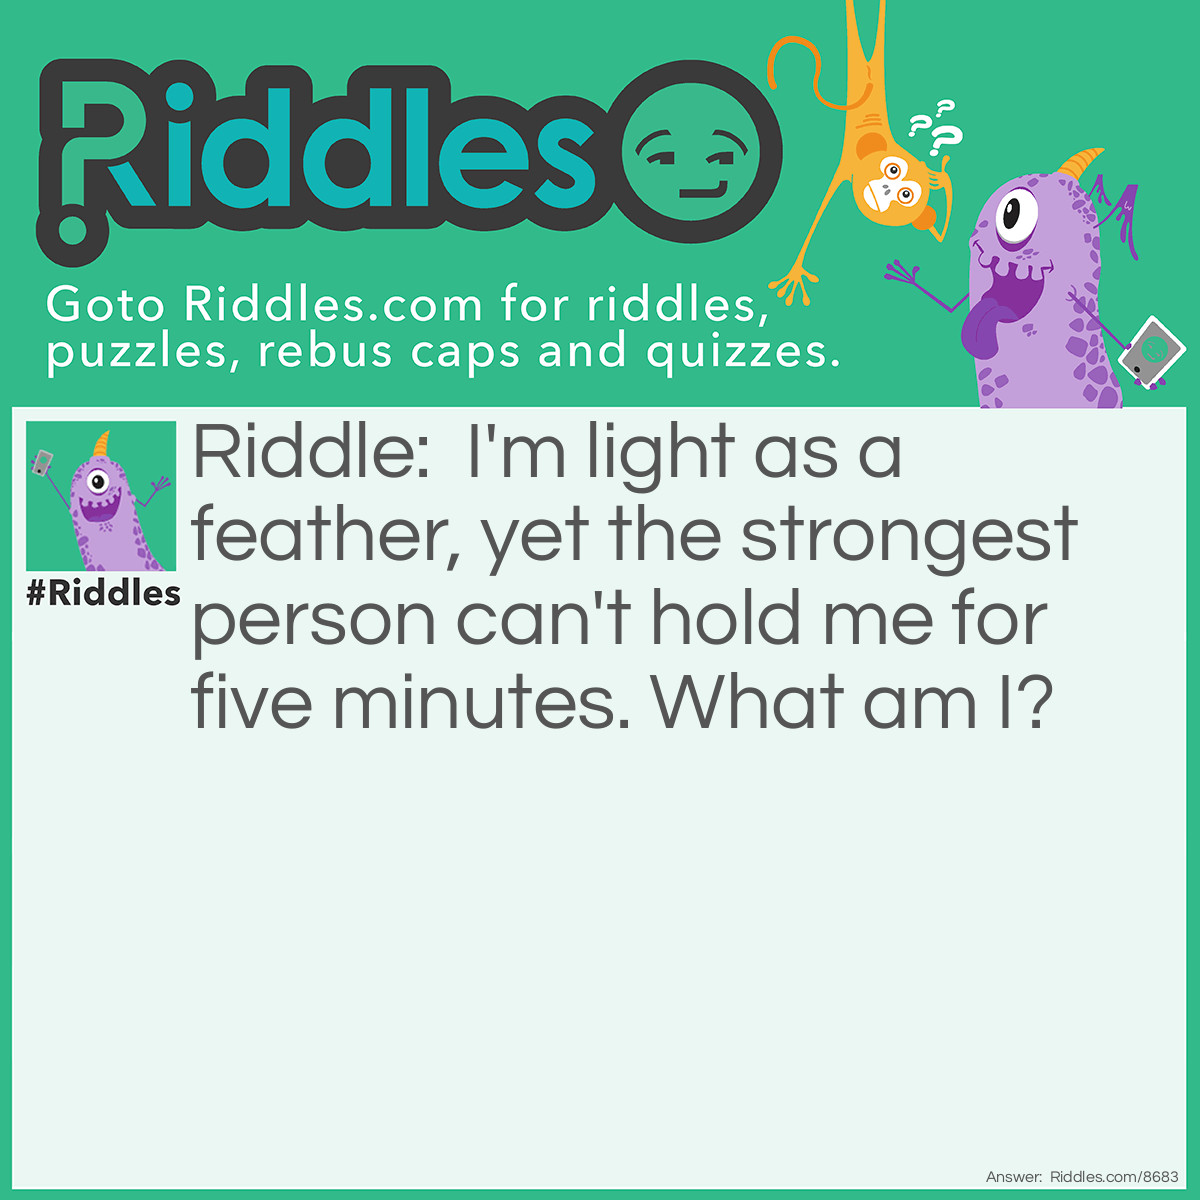 Riddle: I'm light as a feather, yet the strongest person can't hold me for five minutes. What am I? Answer: Your Breath.